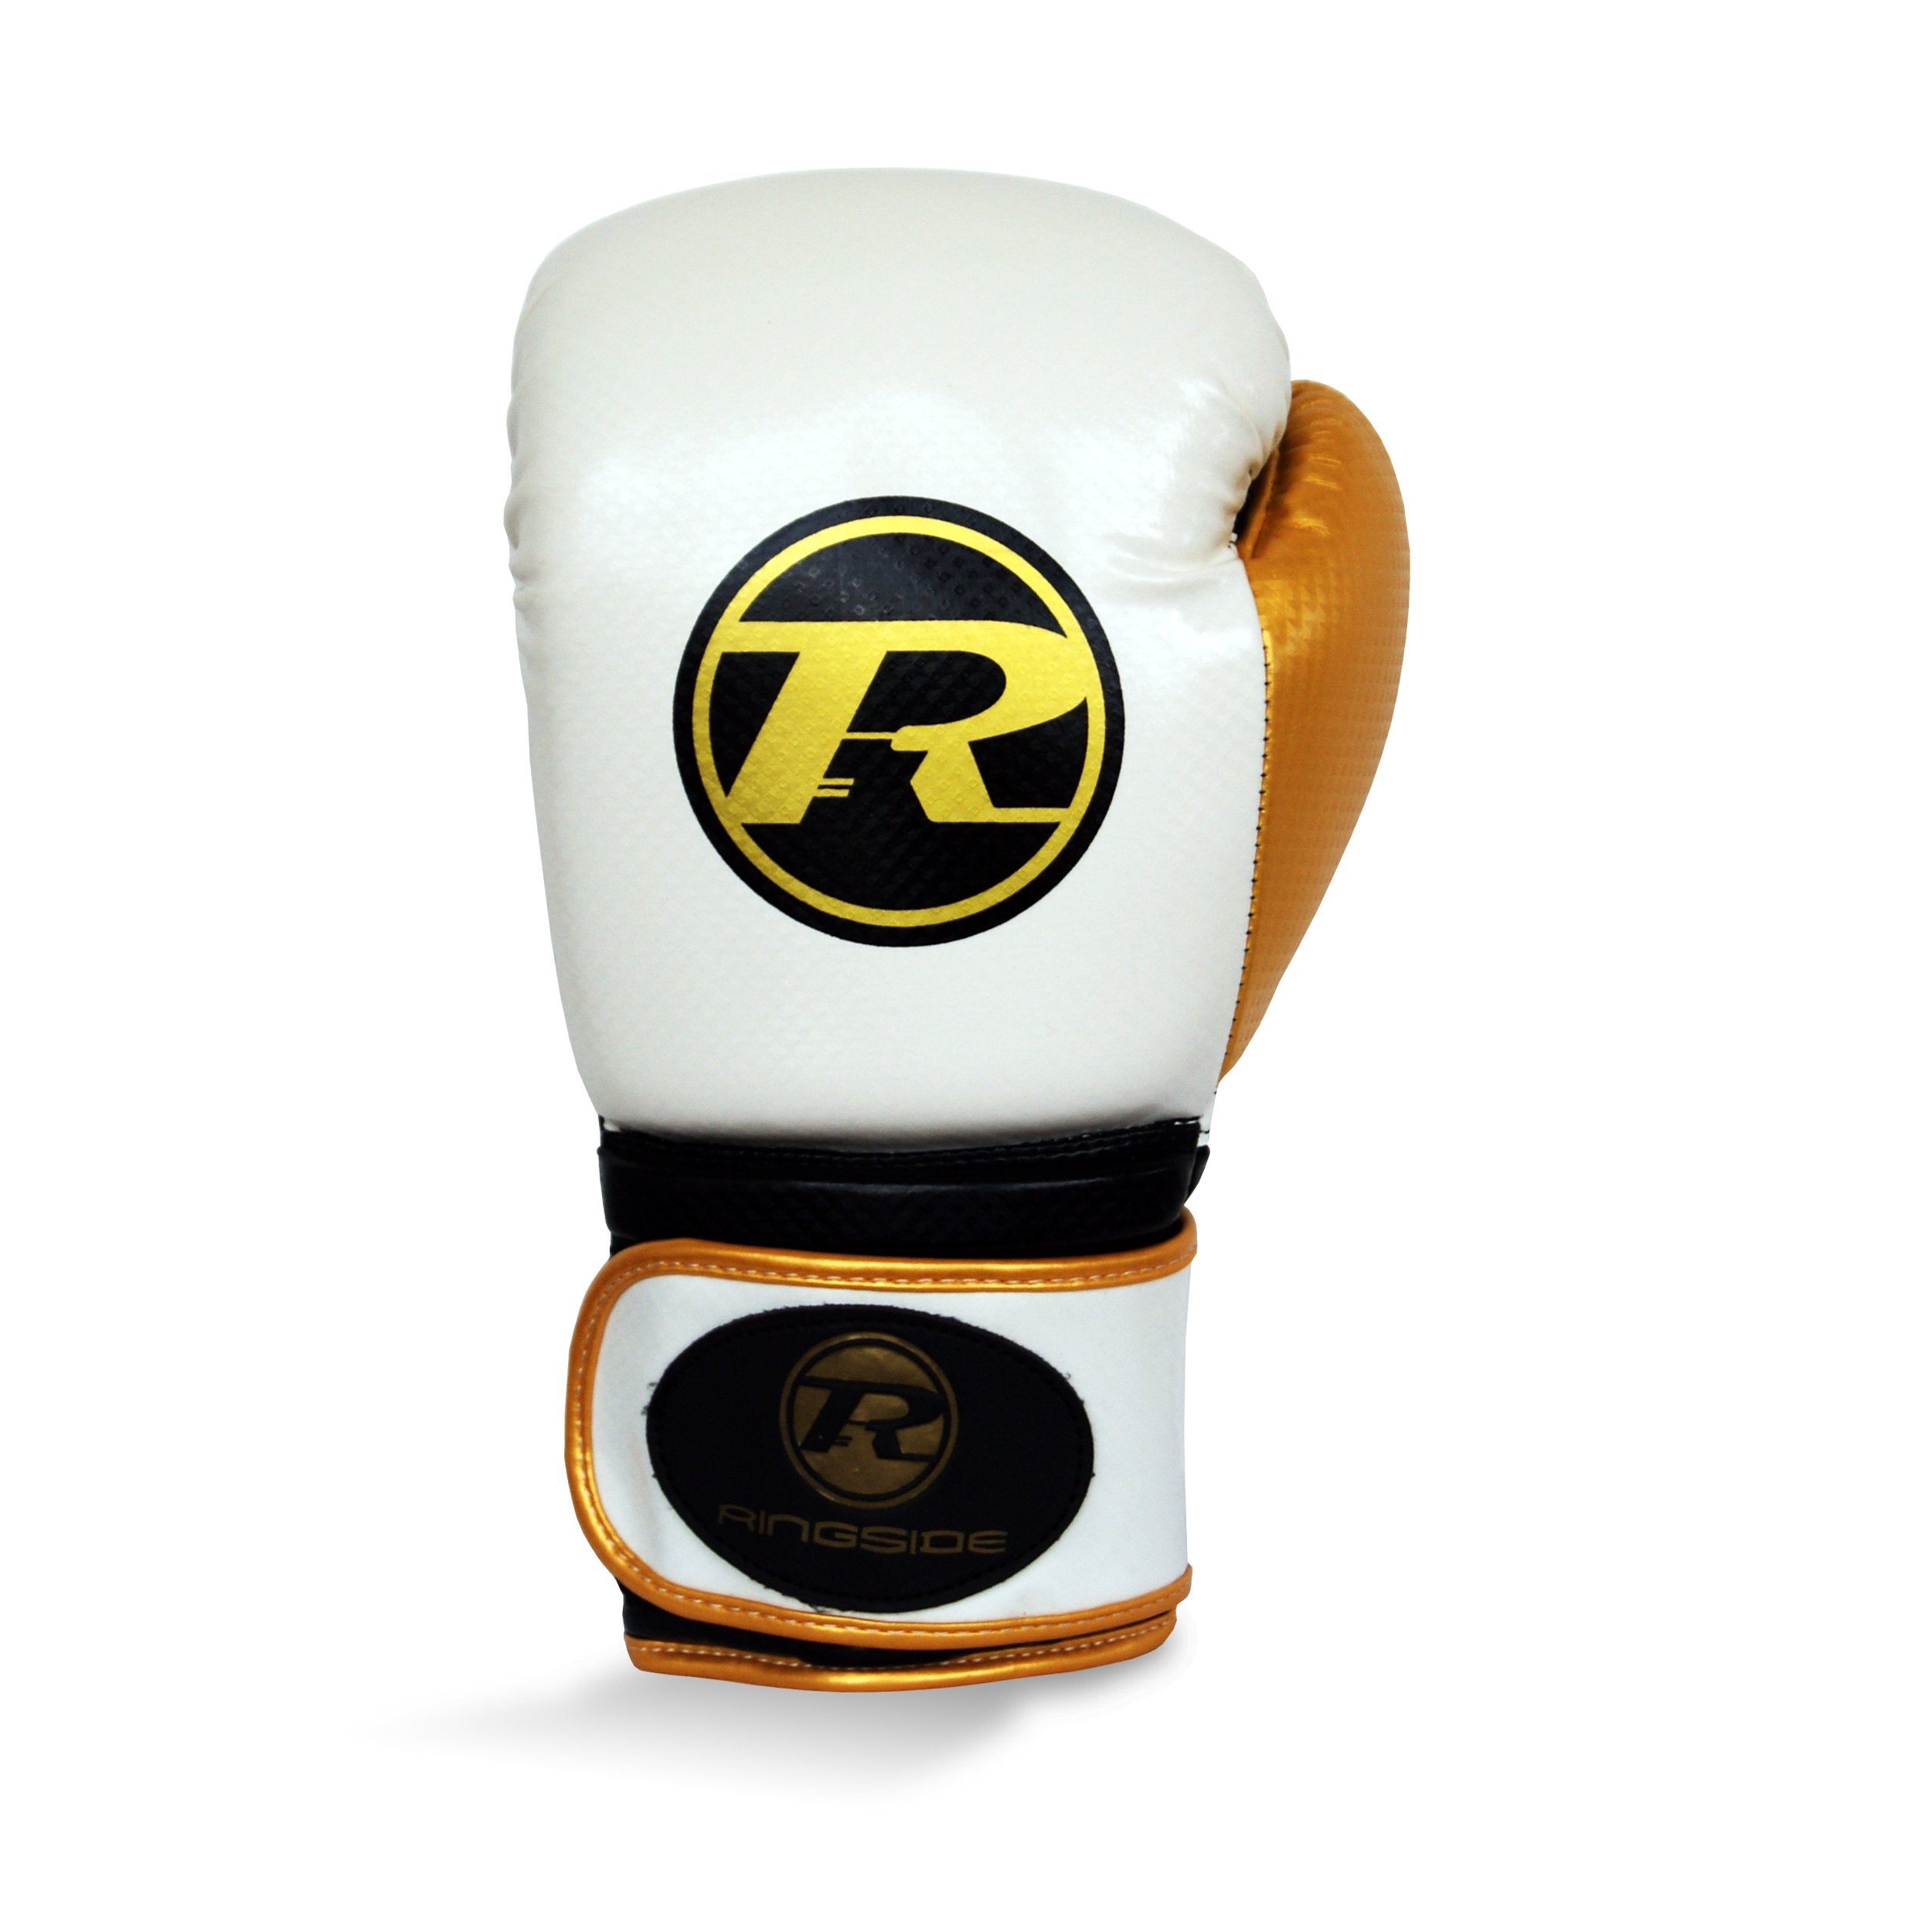 Pro Fitness Synthetic Leather Boxing Glove Metallic White / Black / Gold